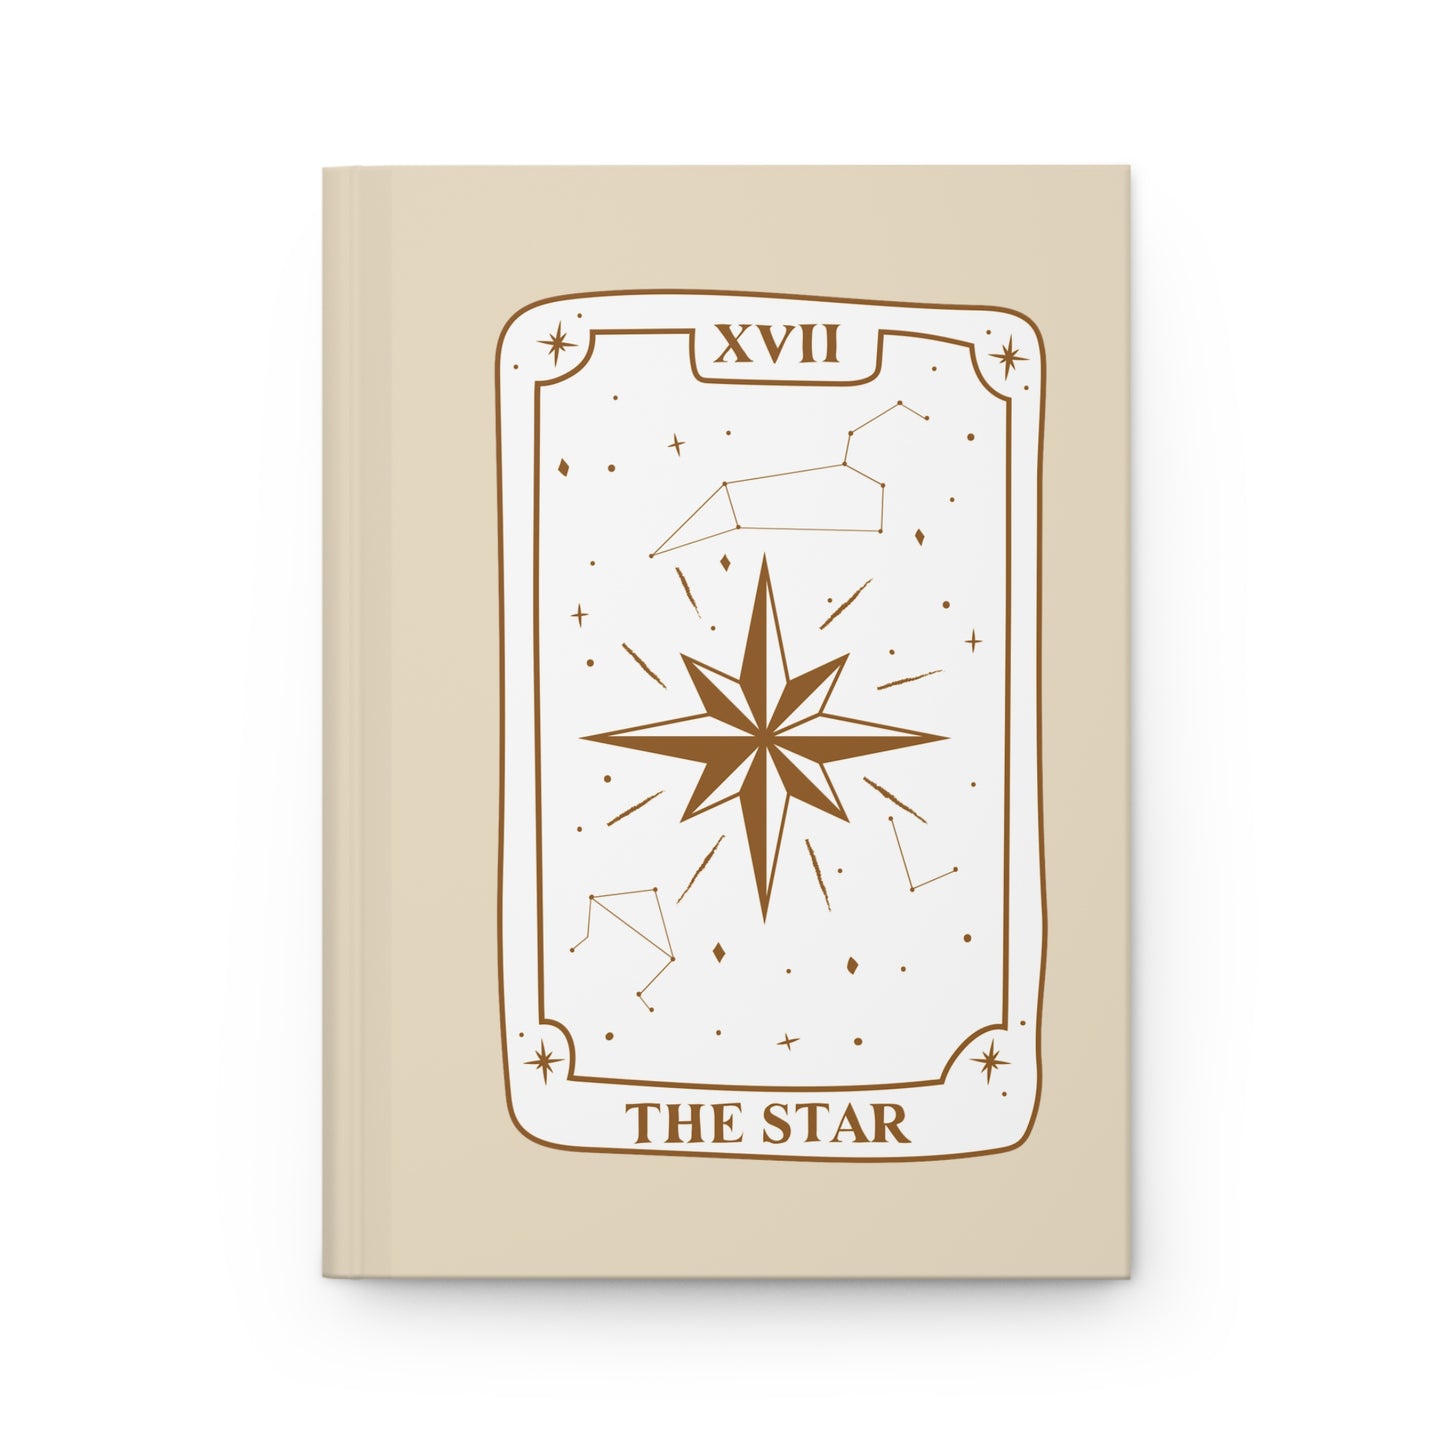 The Star Tarot Hardcover Notebook - Tarot journal, book of shadows, grimoire for witches, pagans, divination notes